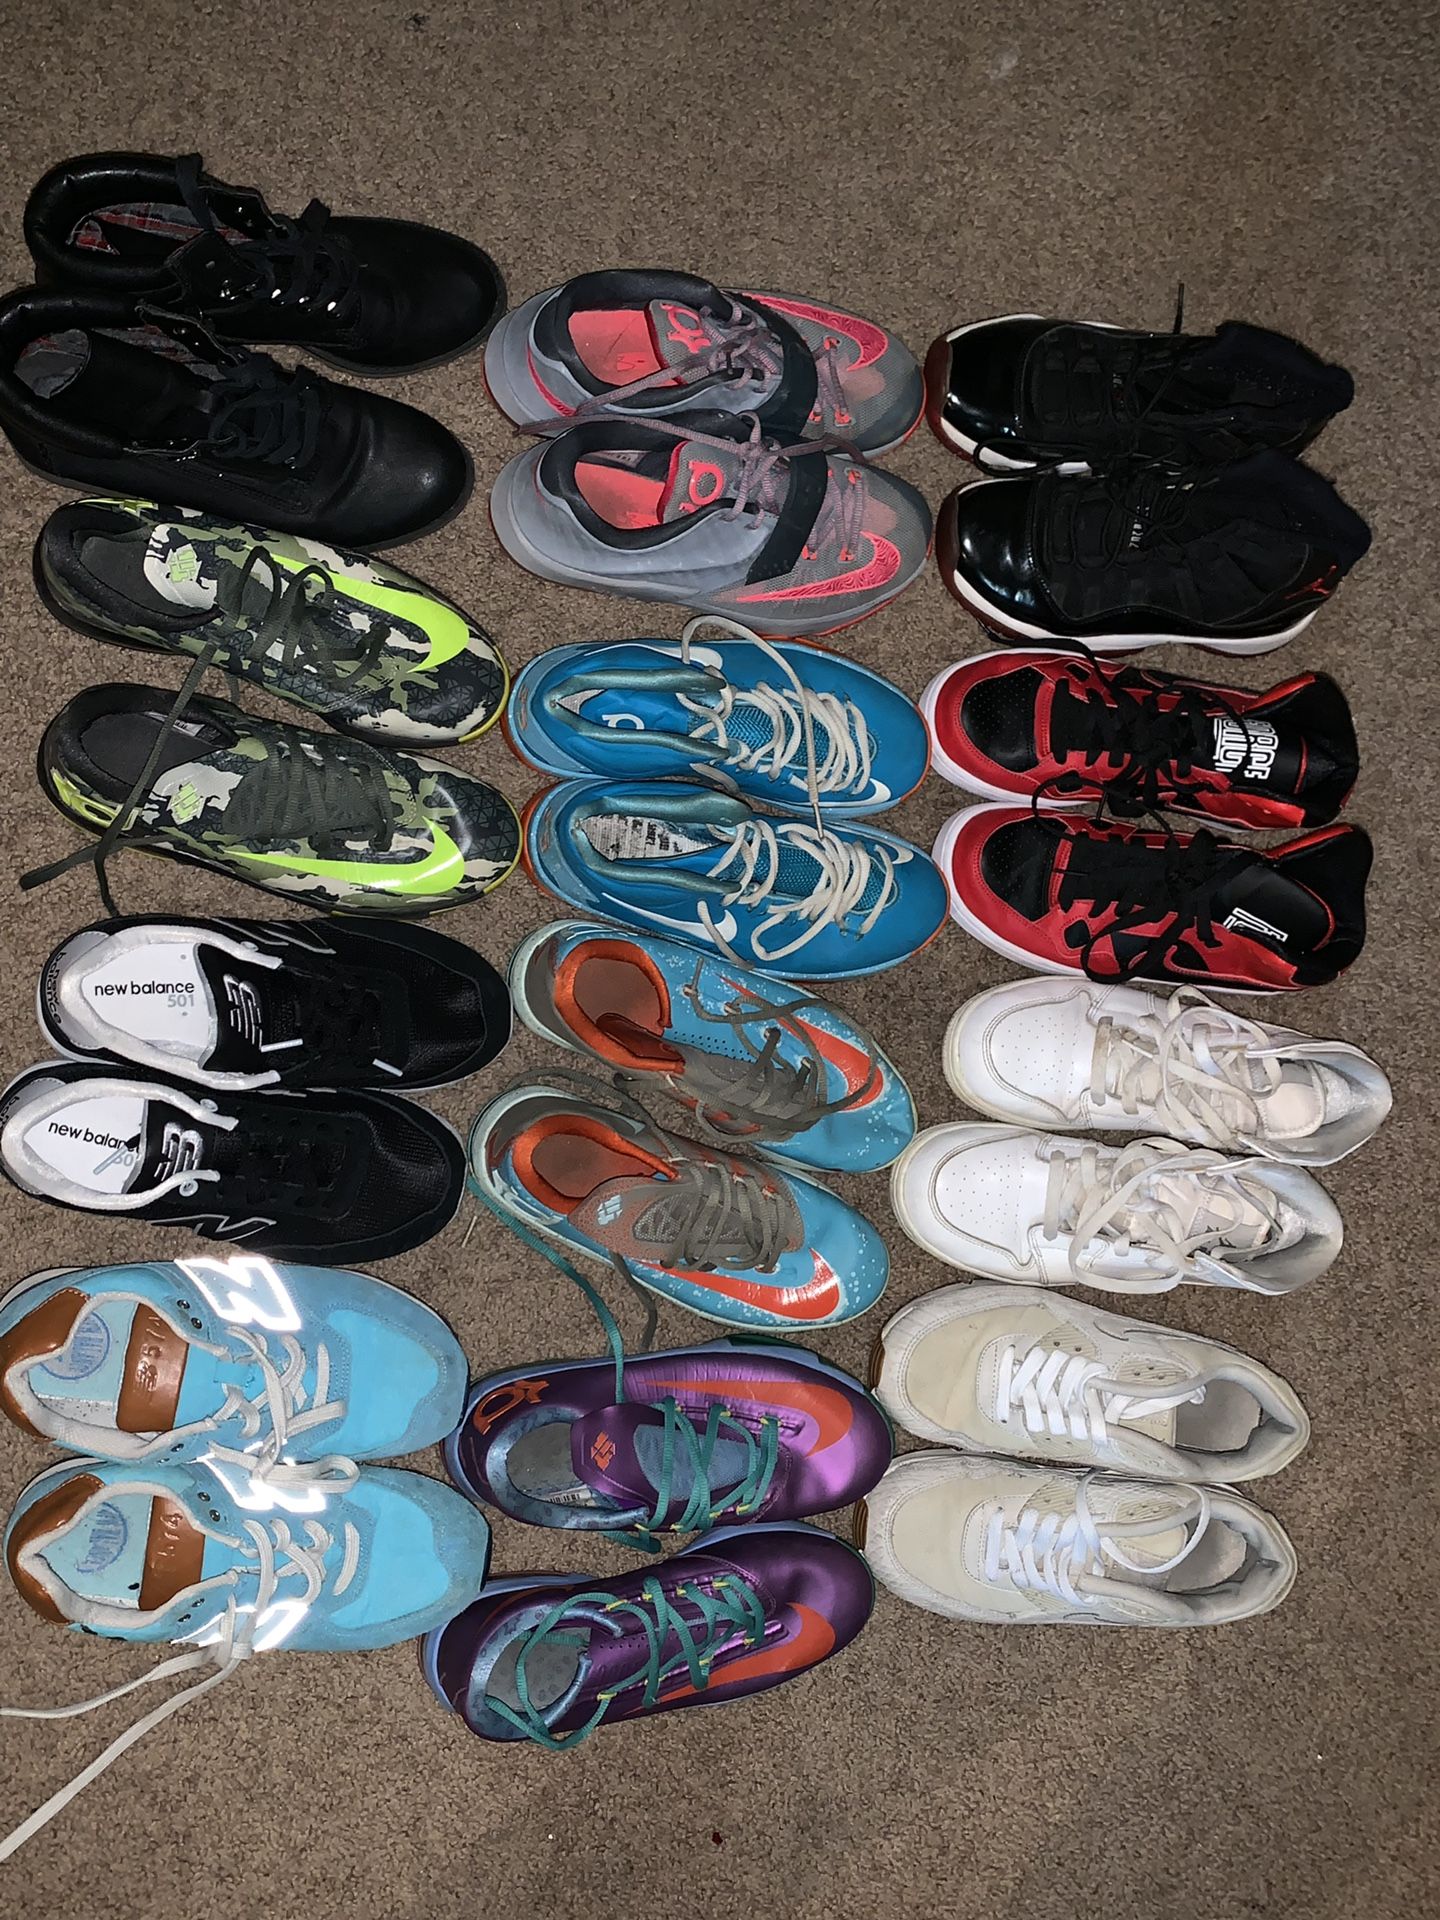 Shoes 👞 👞 👟 👟 👠 👠 For Sell